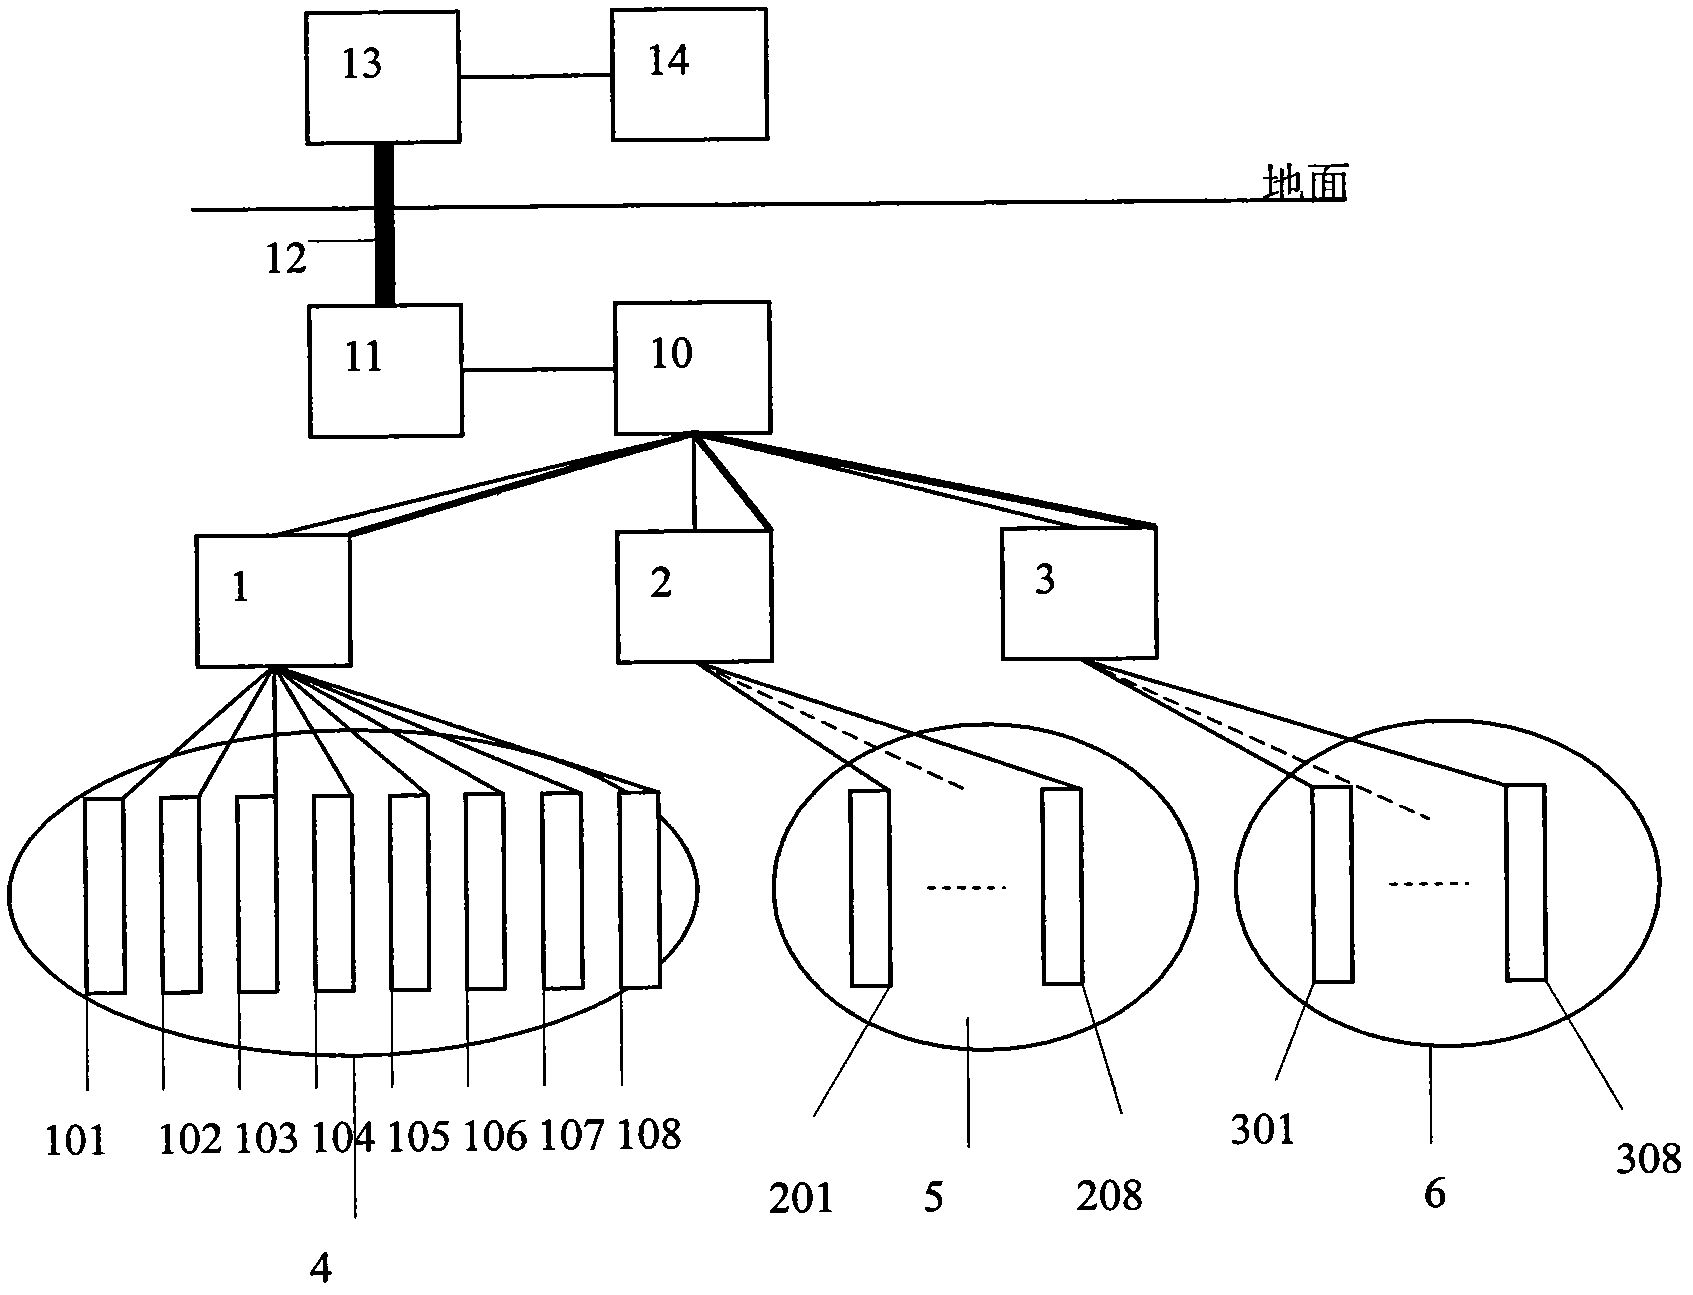 Small mine earthquake monitoring system and radio-detector arrangement method